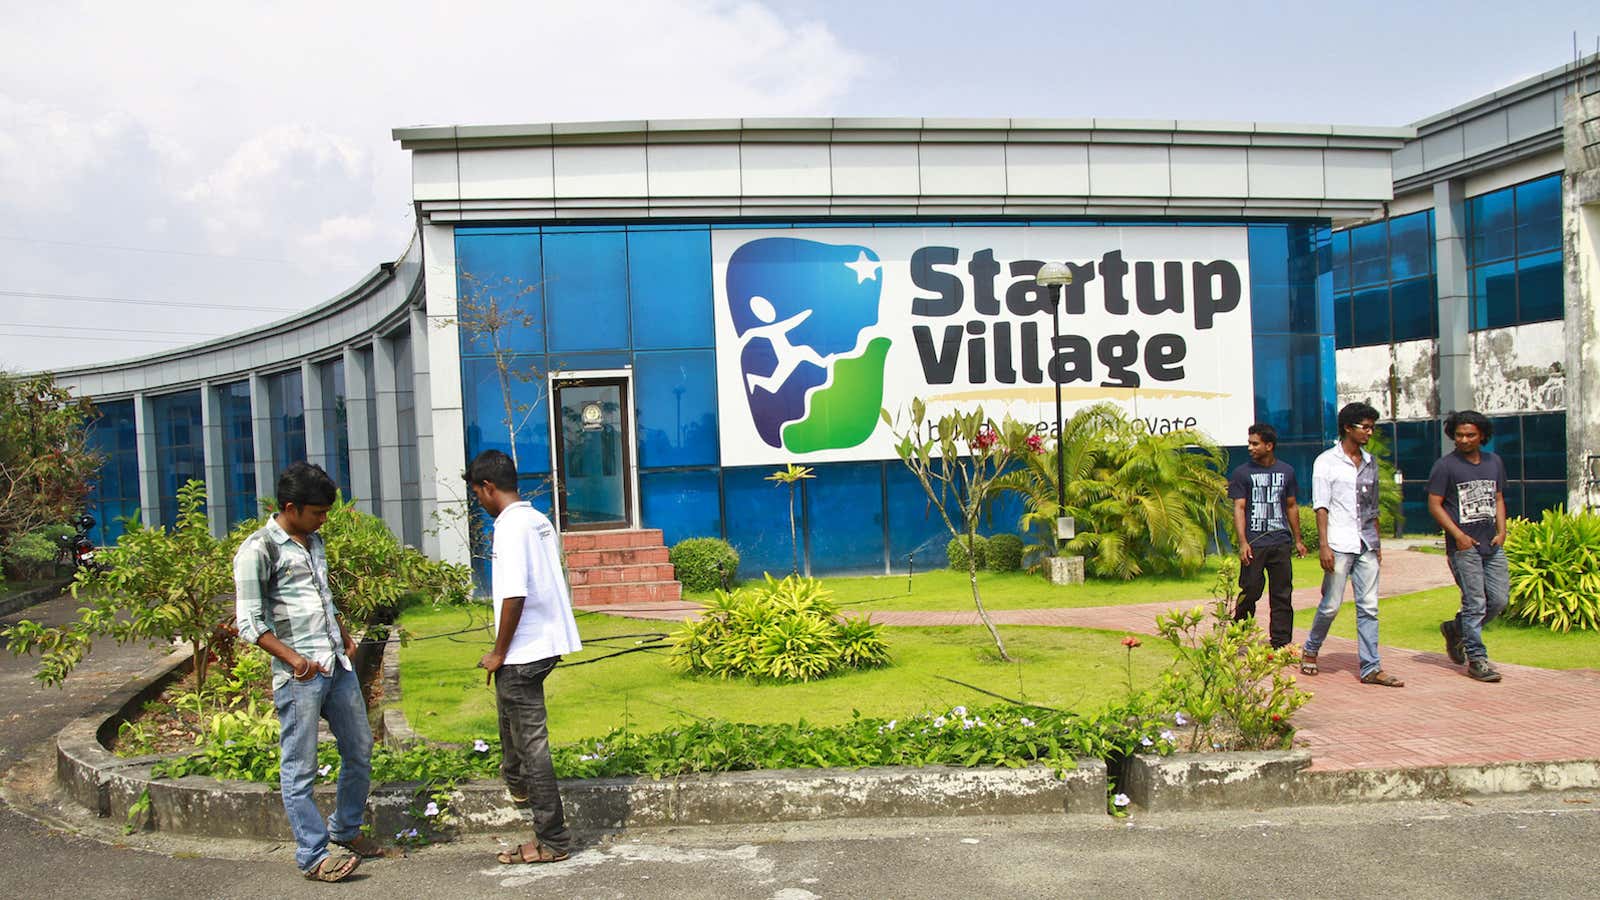 Men in their 20s populate the Indian startup scene.